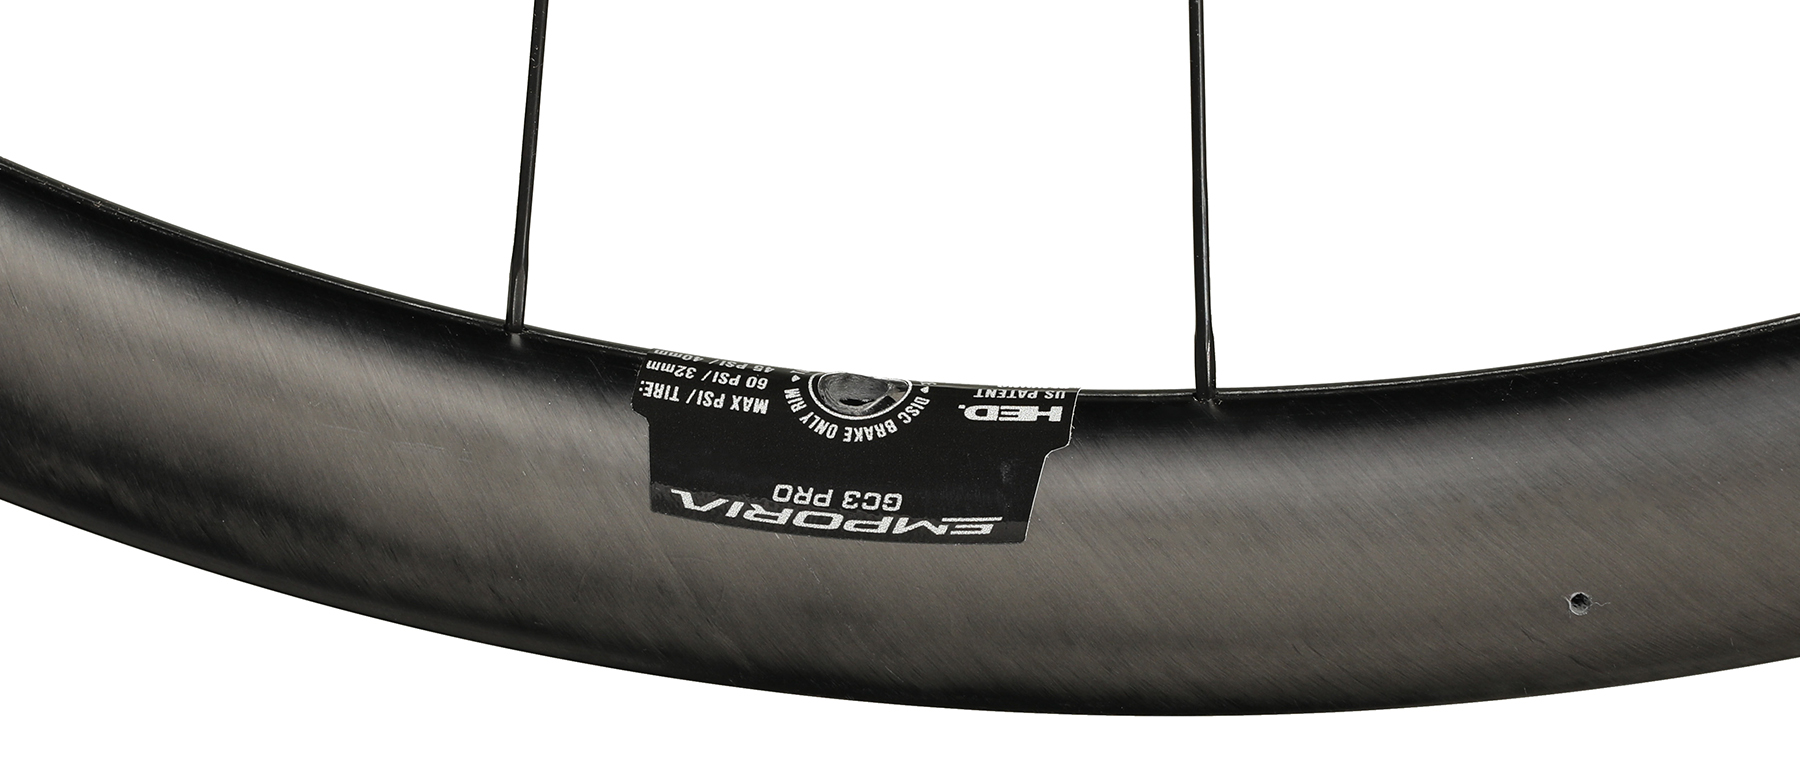 HED Emporia GC3 Pro Carbon Disc Front Wheel